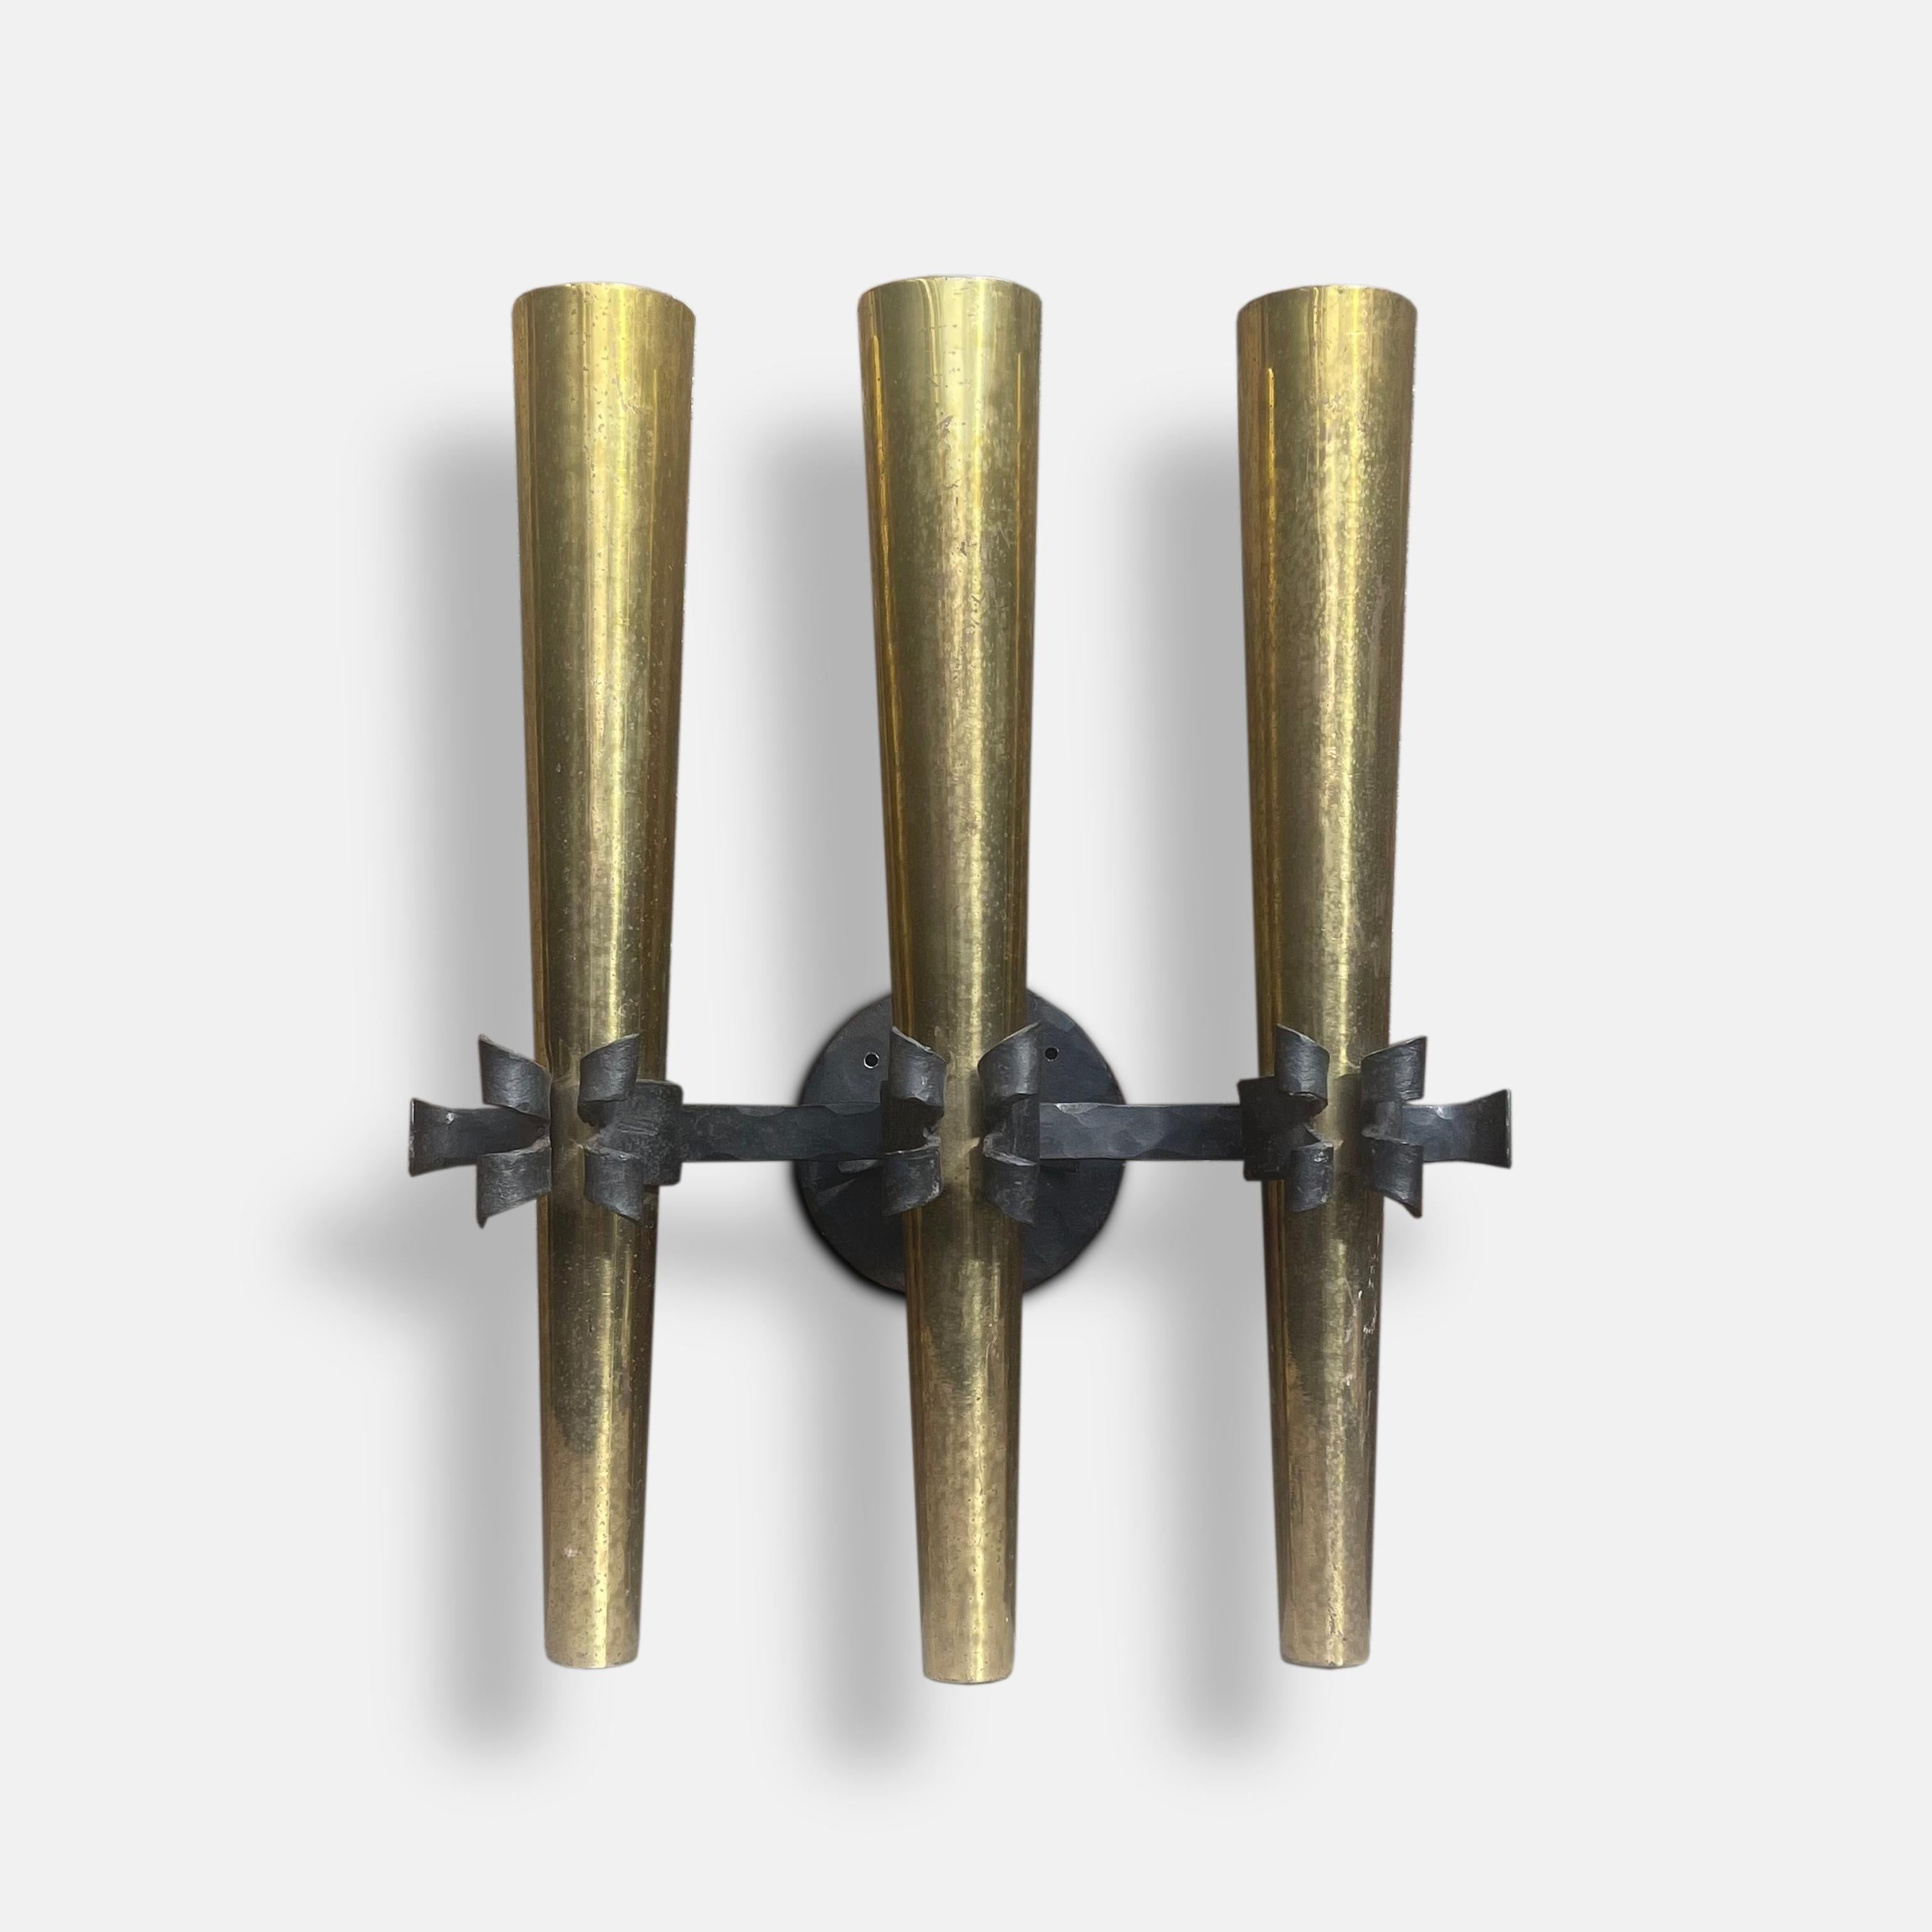 With three tubed brass torches, held in place by the decoratively ribboned arms of its hand-forged wrought iron fixture, this torchière wall sconce is a dramatic piece of French 1950s design.

Dimensions: D 17.6cm W39.2cm x H 45.5cm.